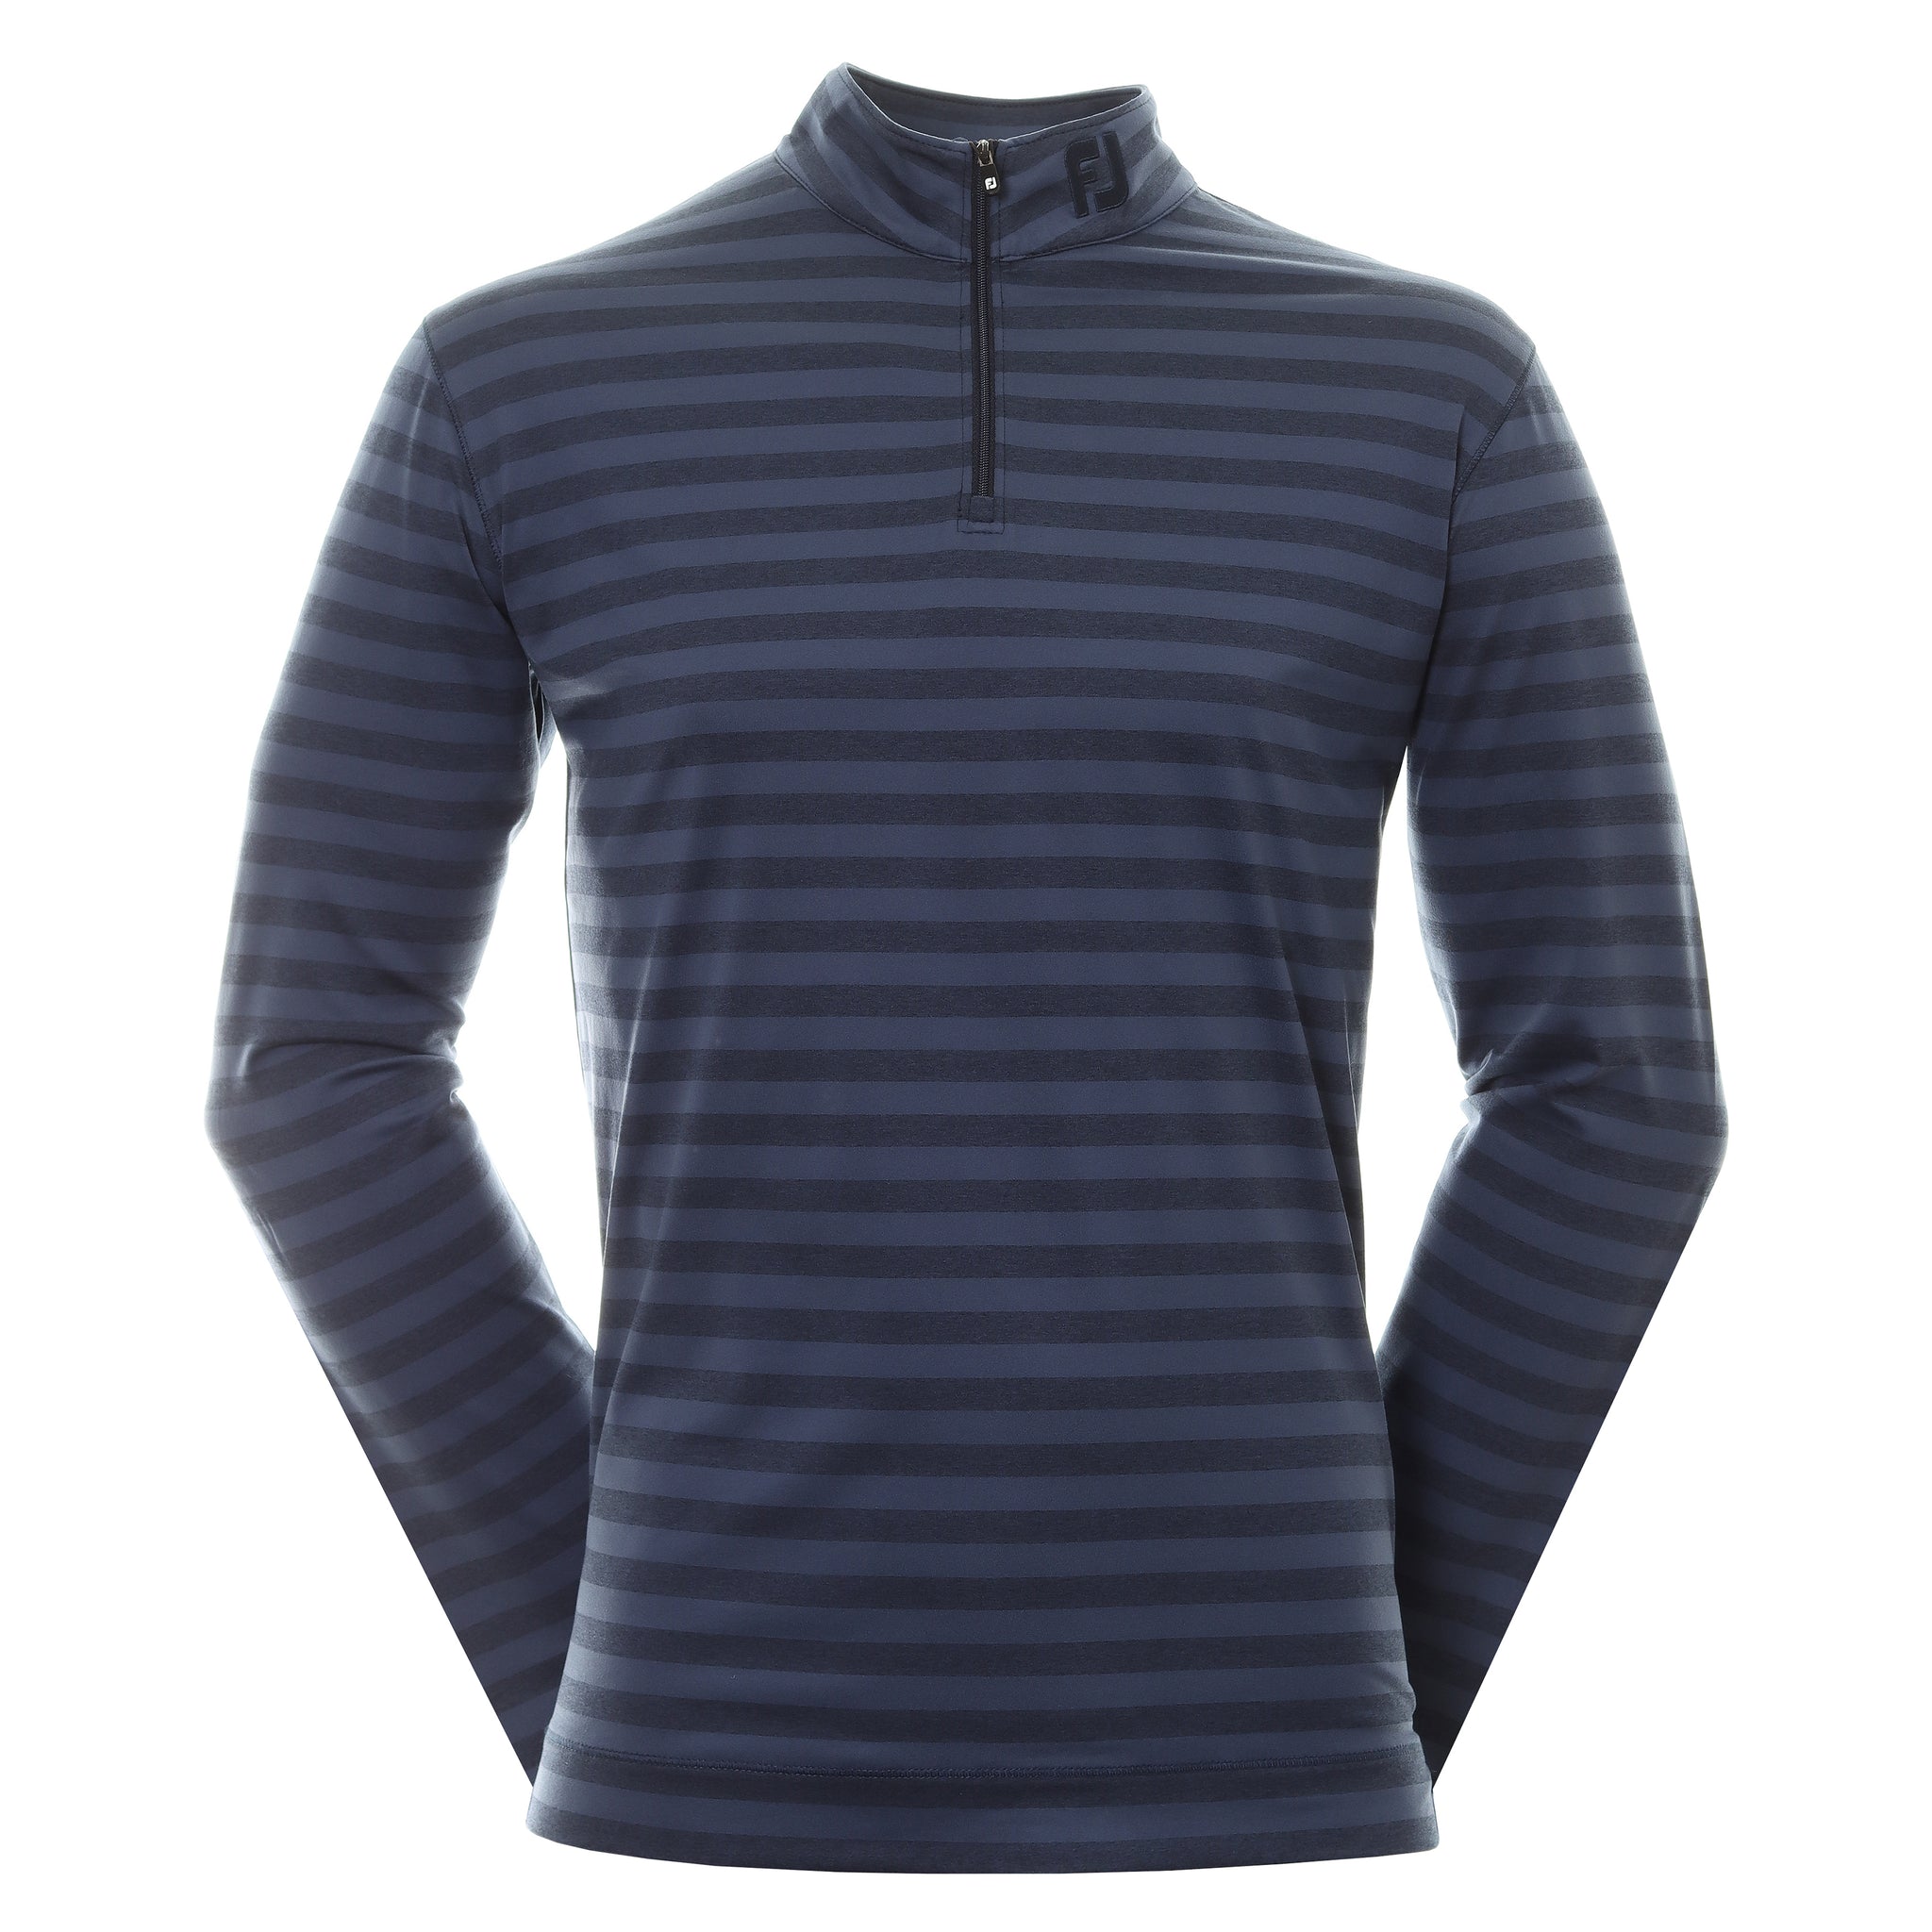 footjoy-peach-tonal-stripe-chill-out-pullover-88444-navy